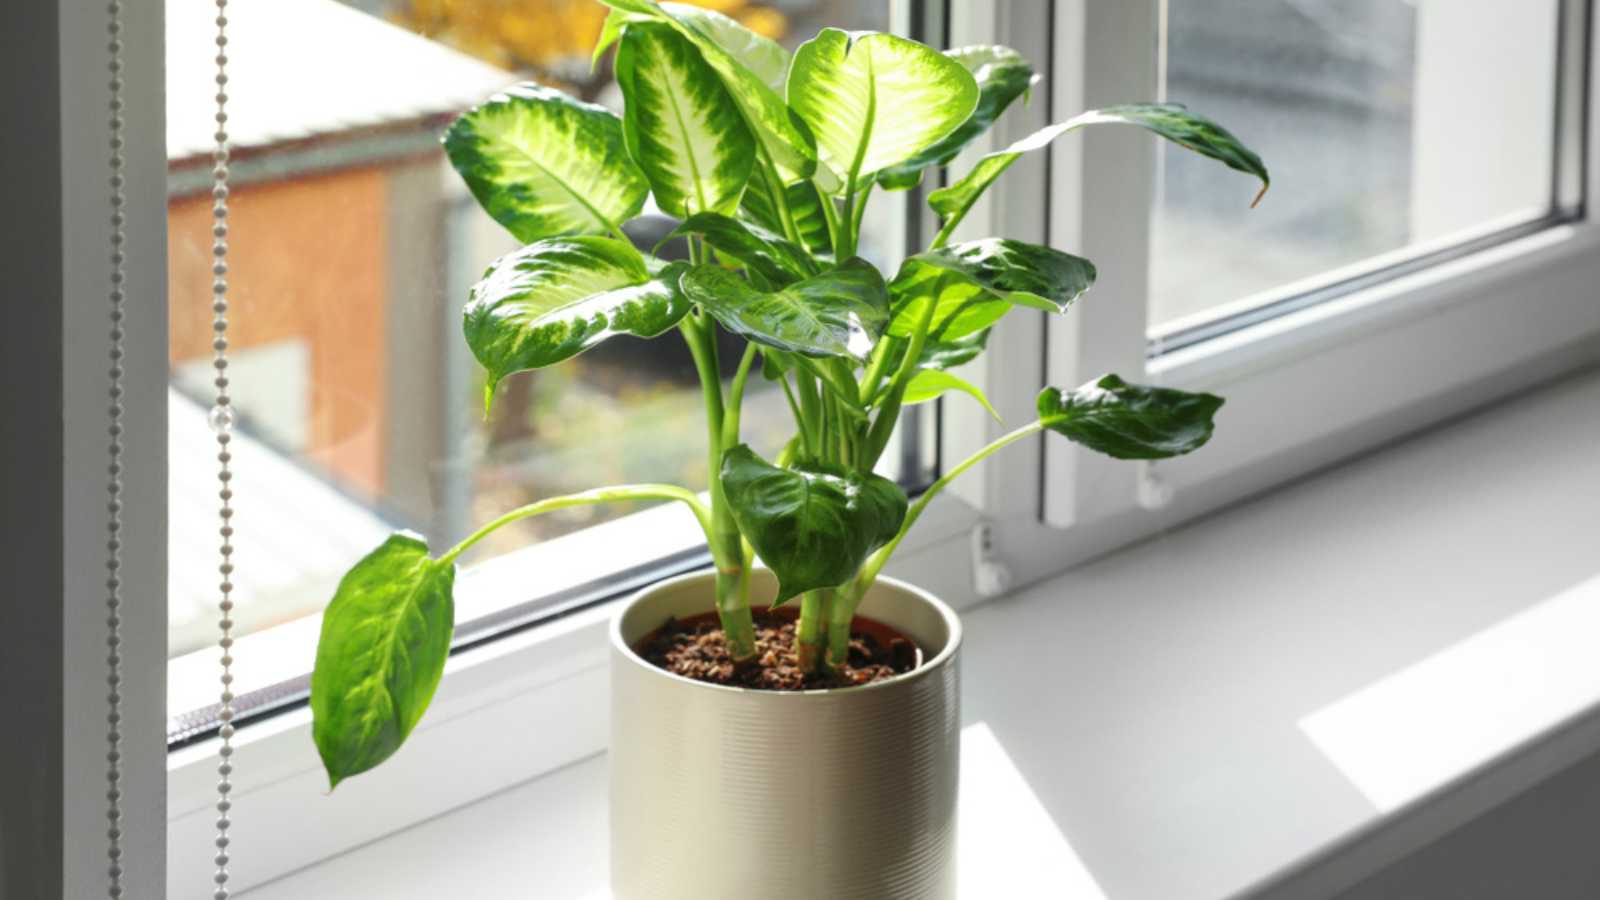 Beautiful Dieffenbachia plant on windowsill at home. Space for text